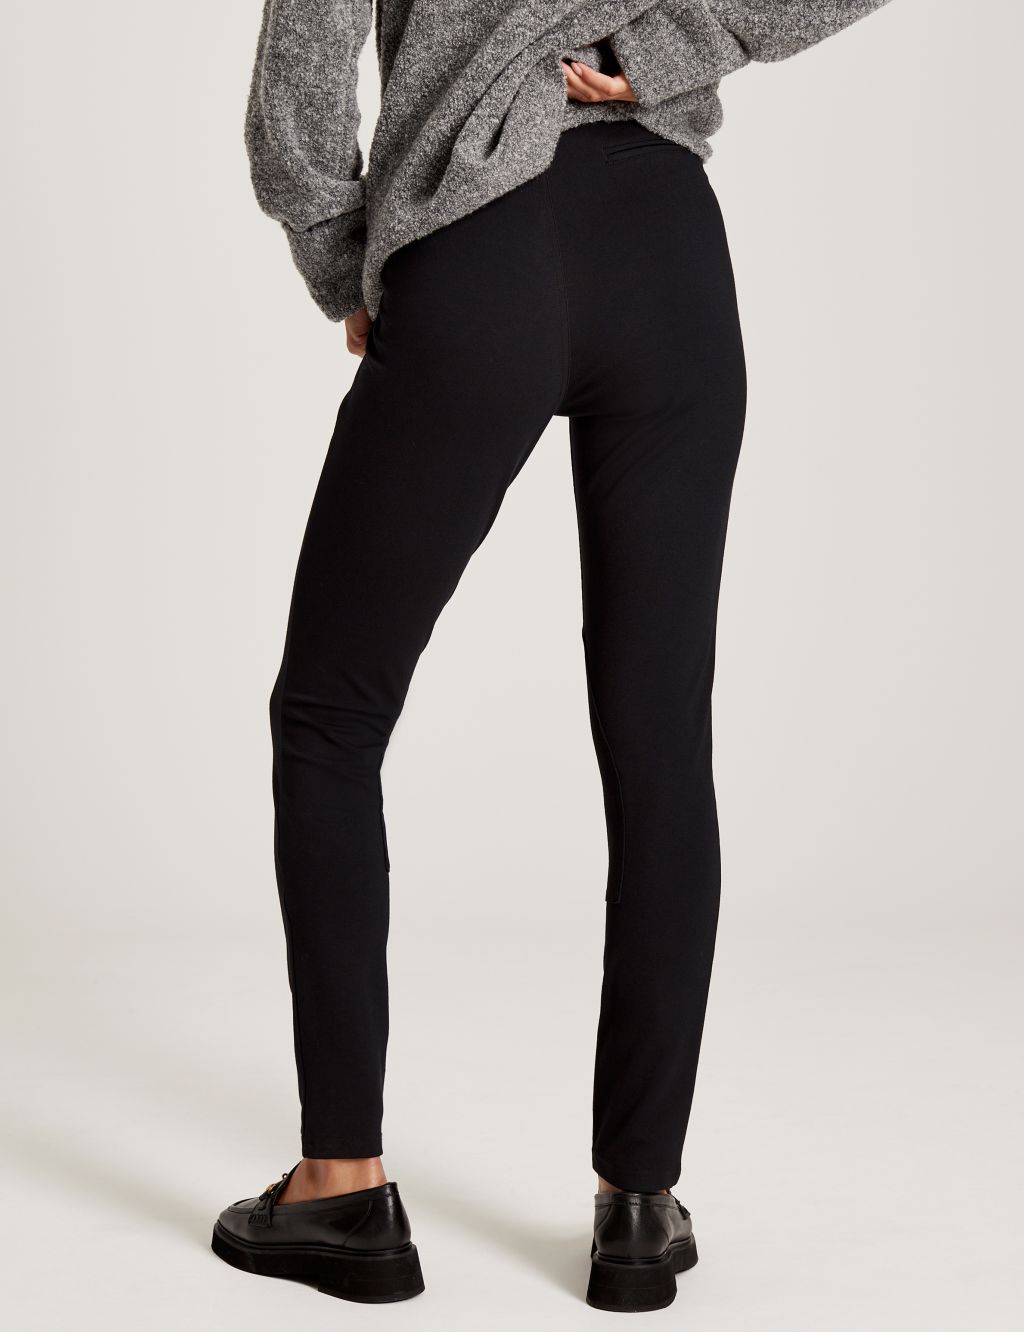 Jersey Slim Fit Trousers image 3